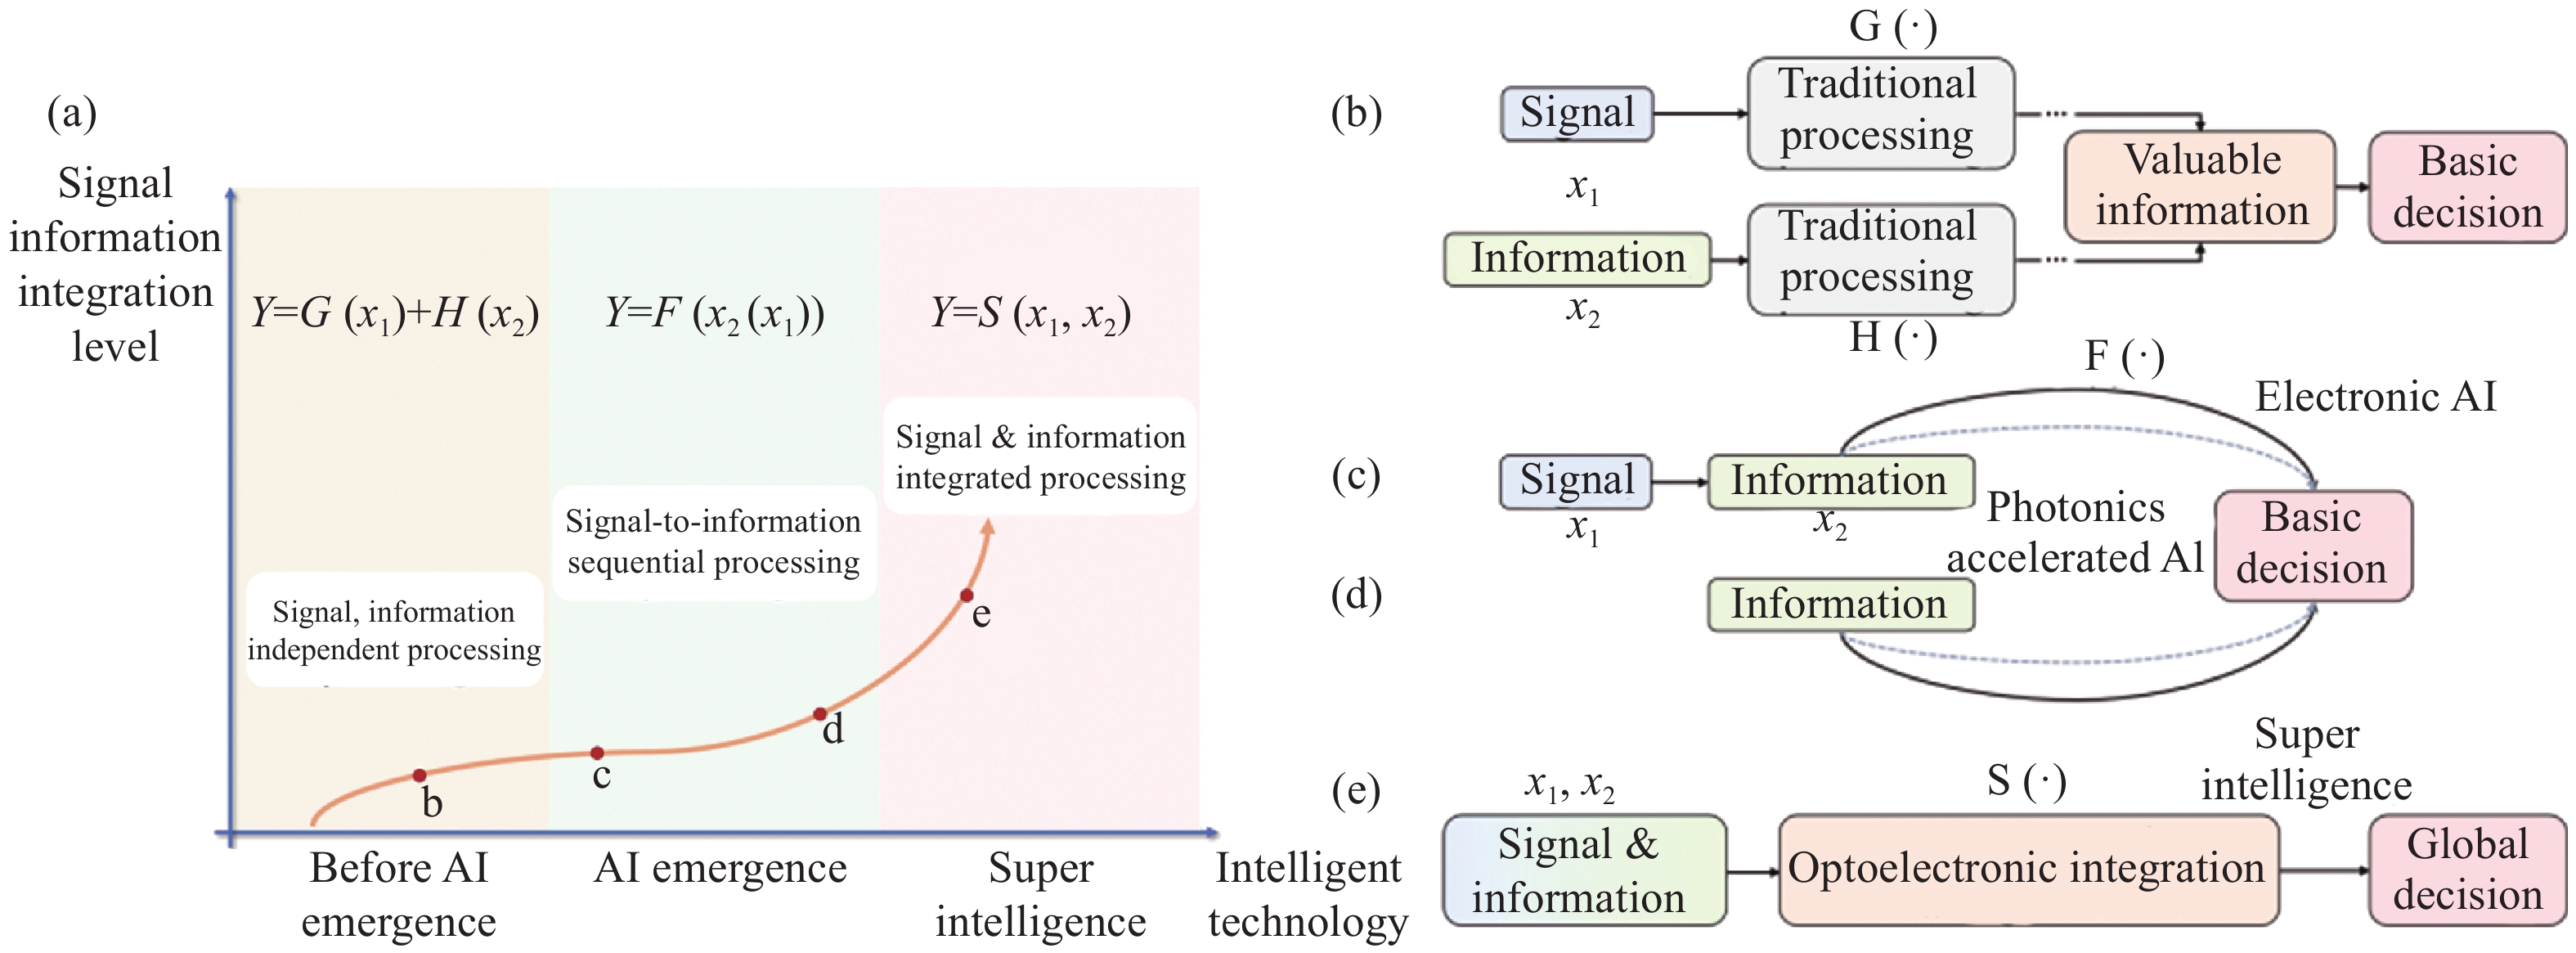 Schematics of the trend (a) and the schemes (b)-(e) of the integrated processing for signal and information. Figures (b)-(e) correspond to the b-e stages pointed out in Fig. 1(a), respectively